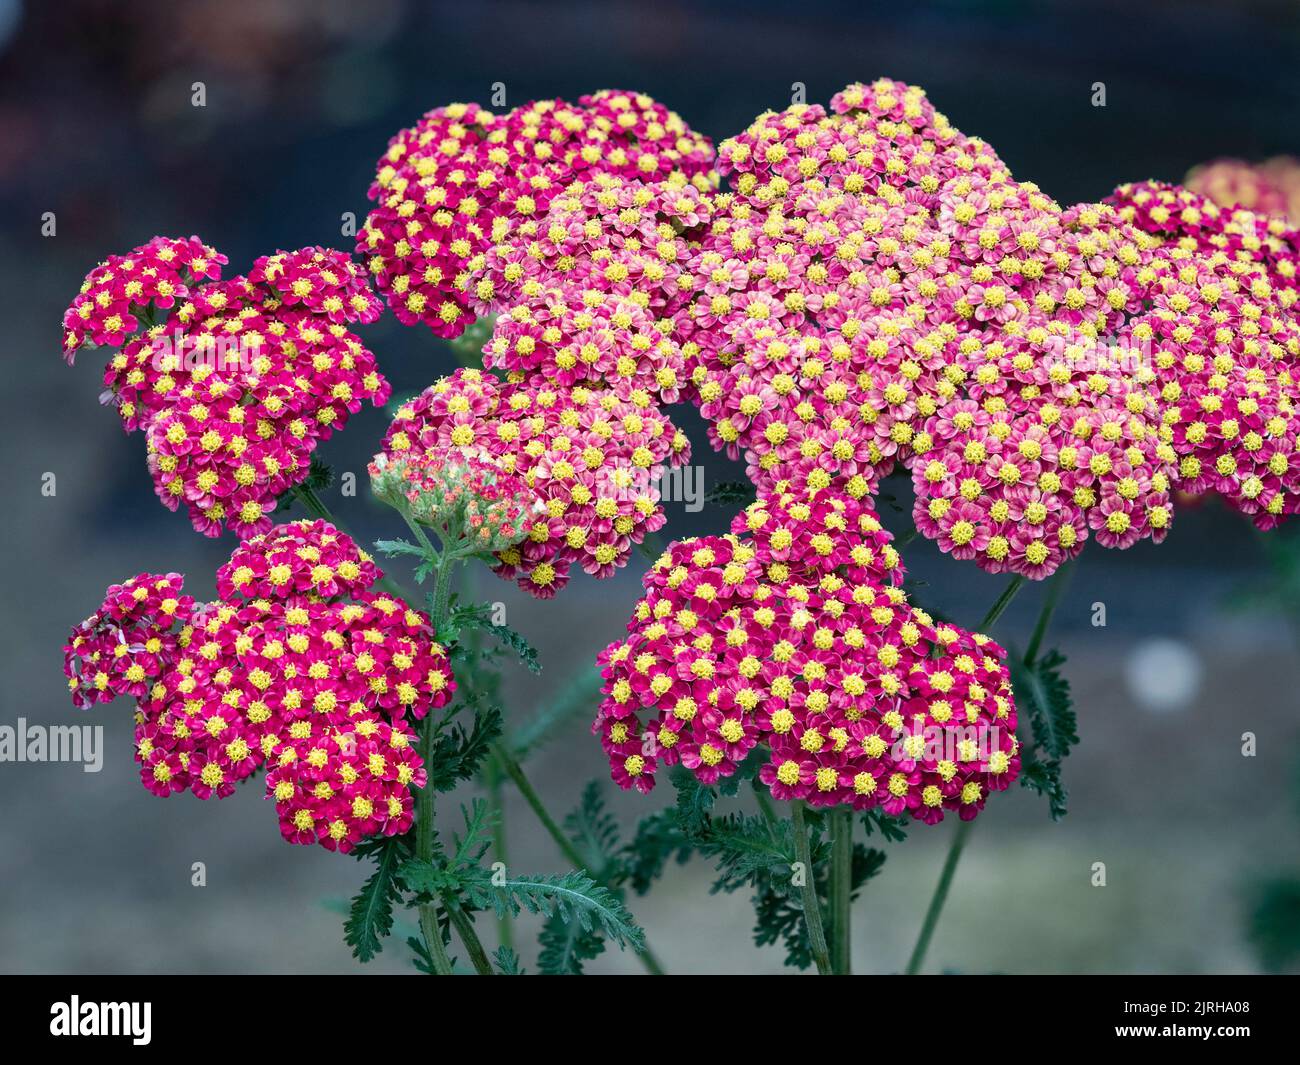 Dome shaped flower head with golden centred red summer blooms of the compact hardy perennial, Achillea millefolium 'Strawberry Seduction' Stock Photo